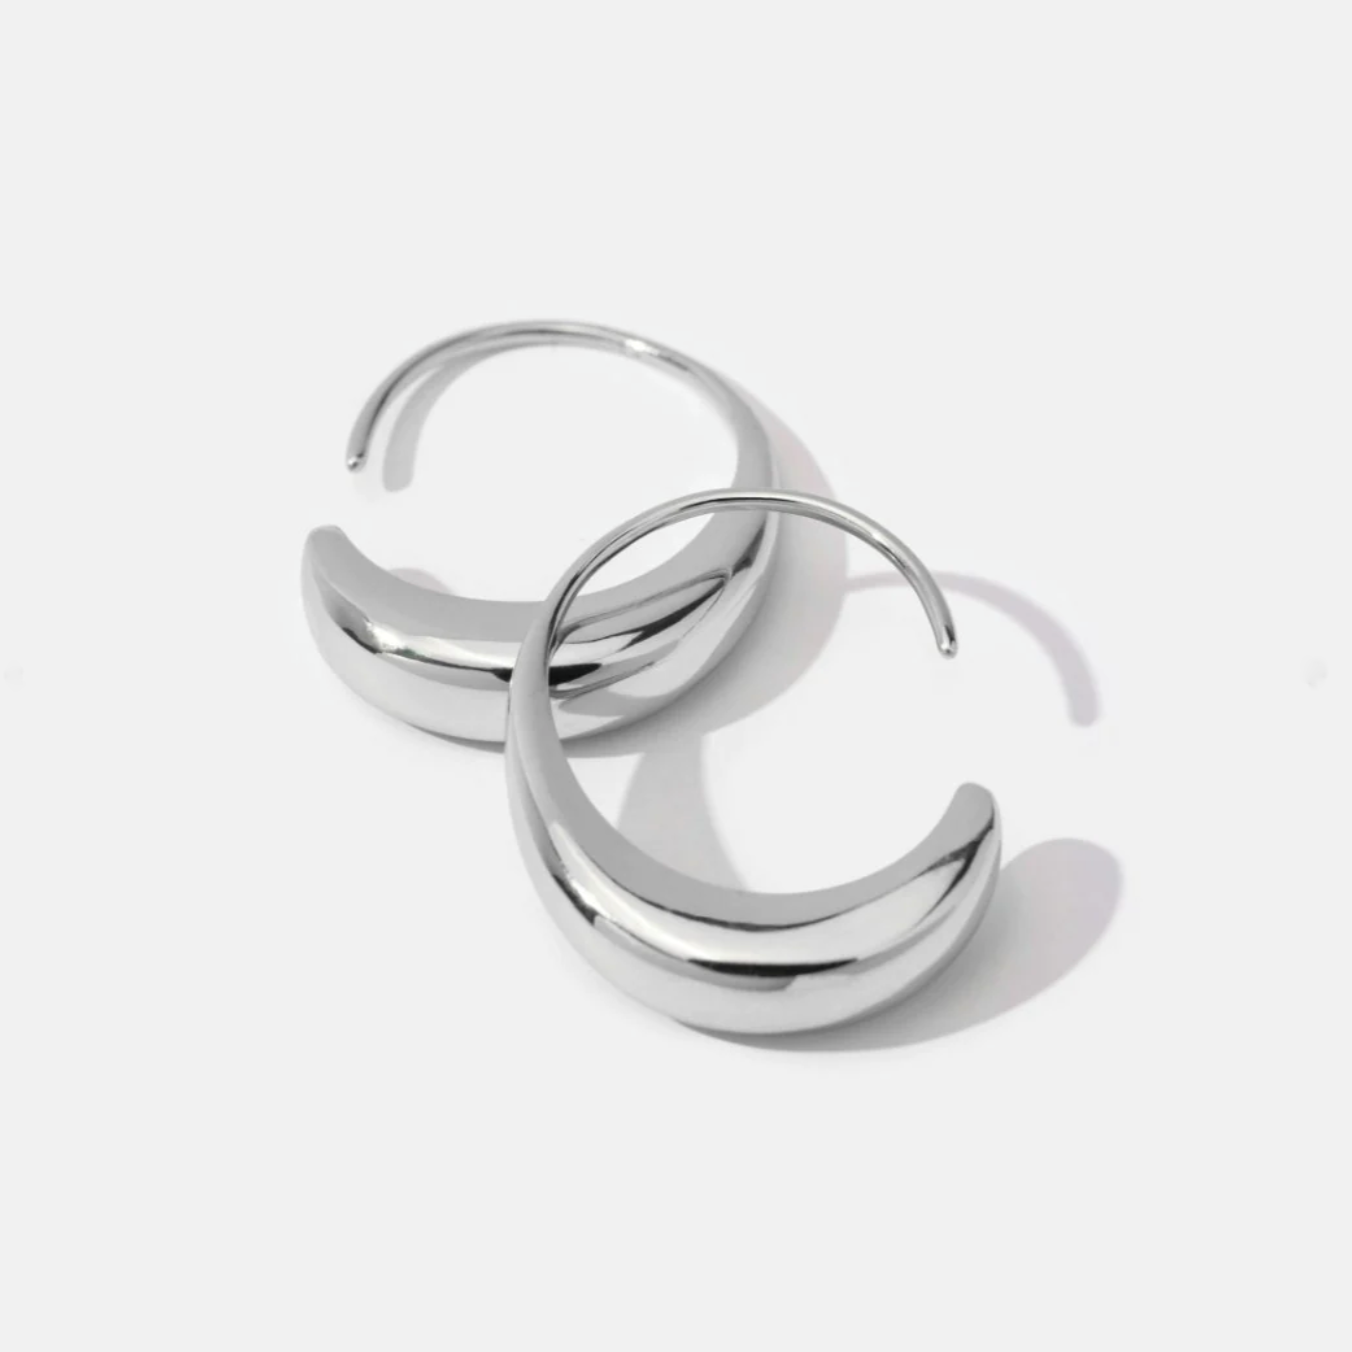 Large C form silver hoops for women